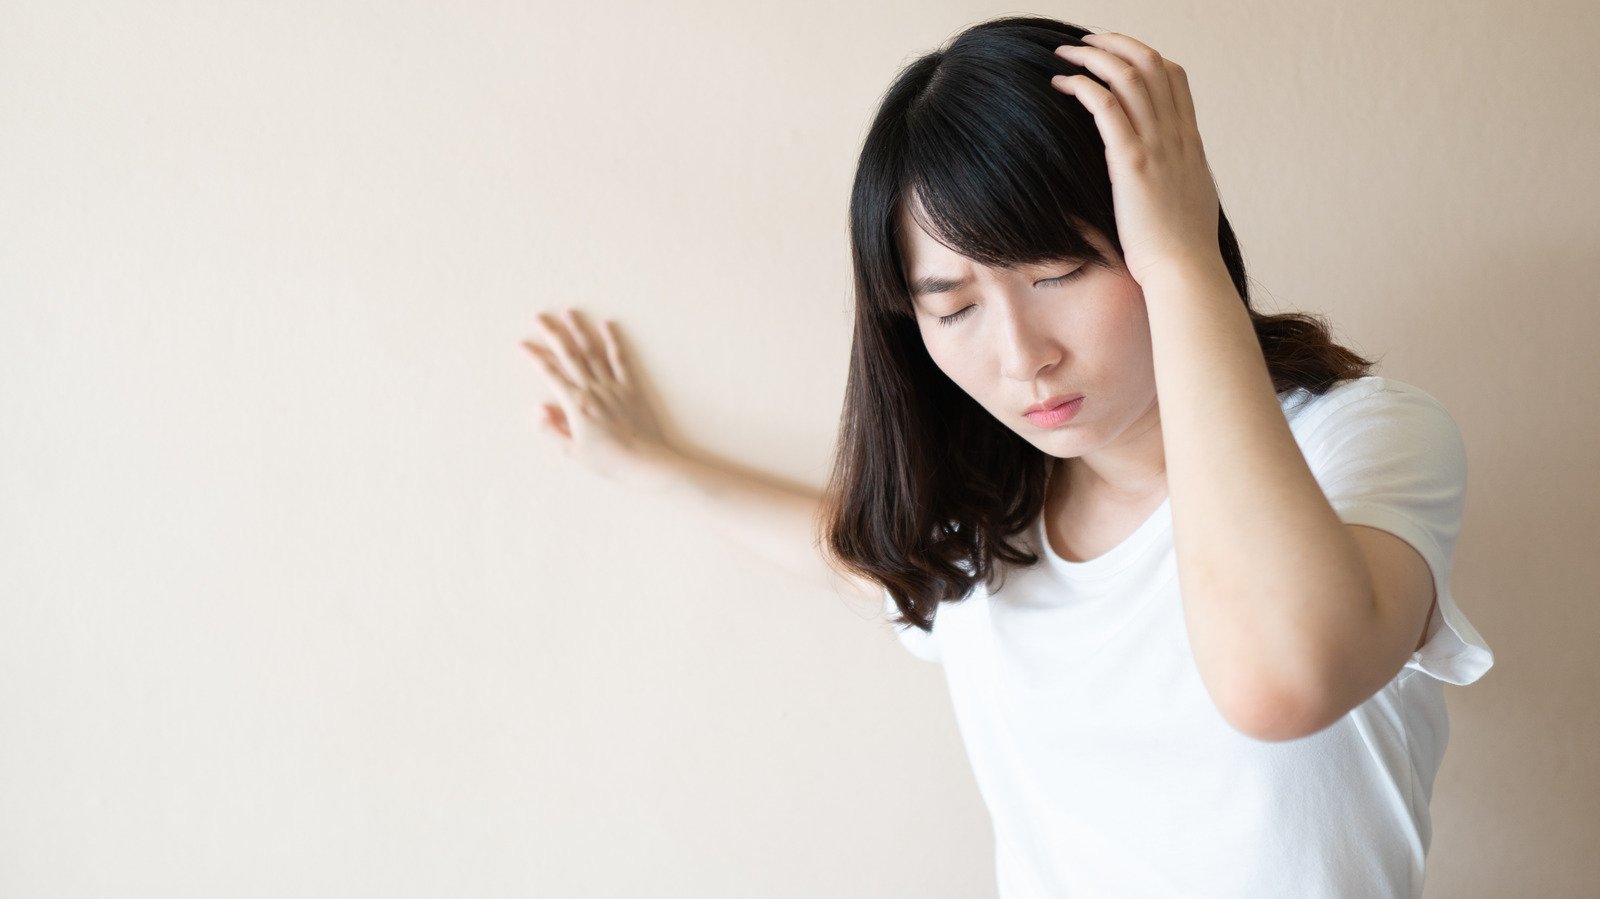 Why Your Dizziness Might Be More Serious Than You Think